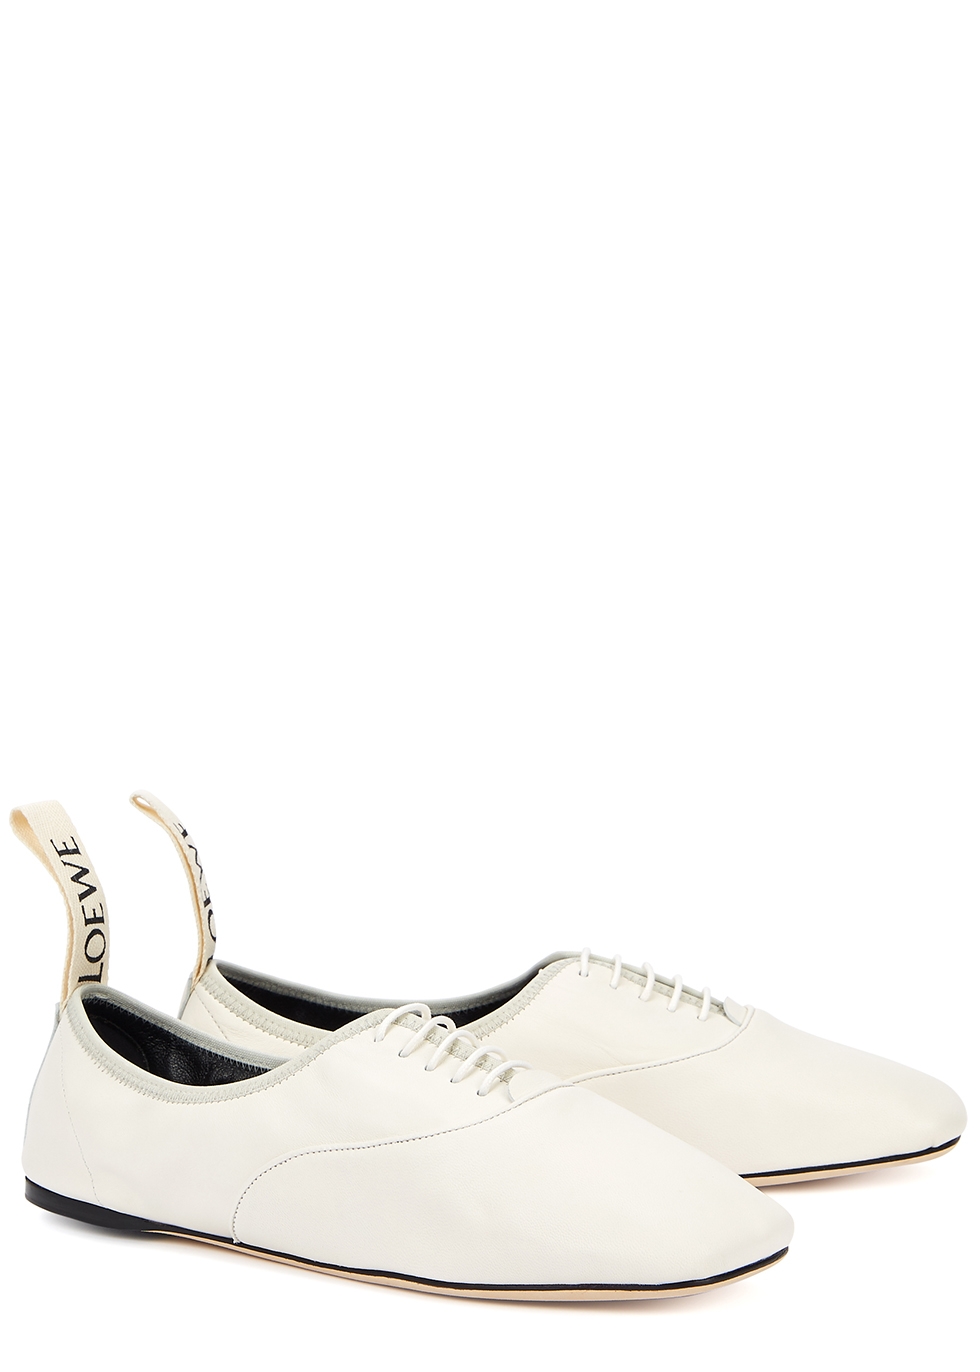 womens white leather flats